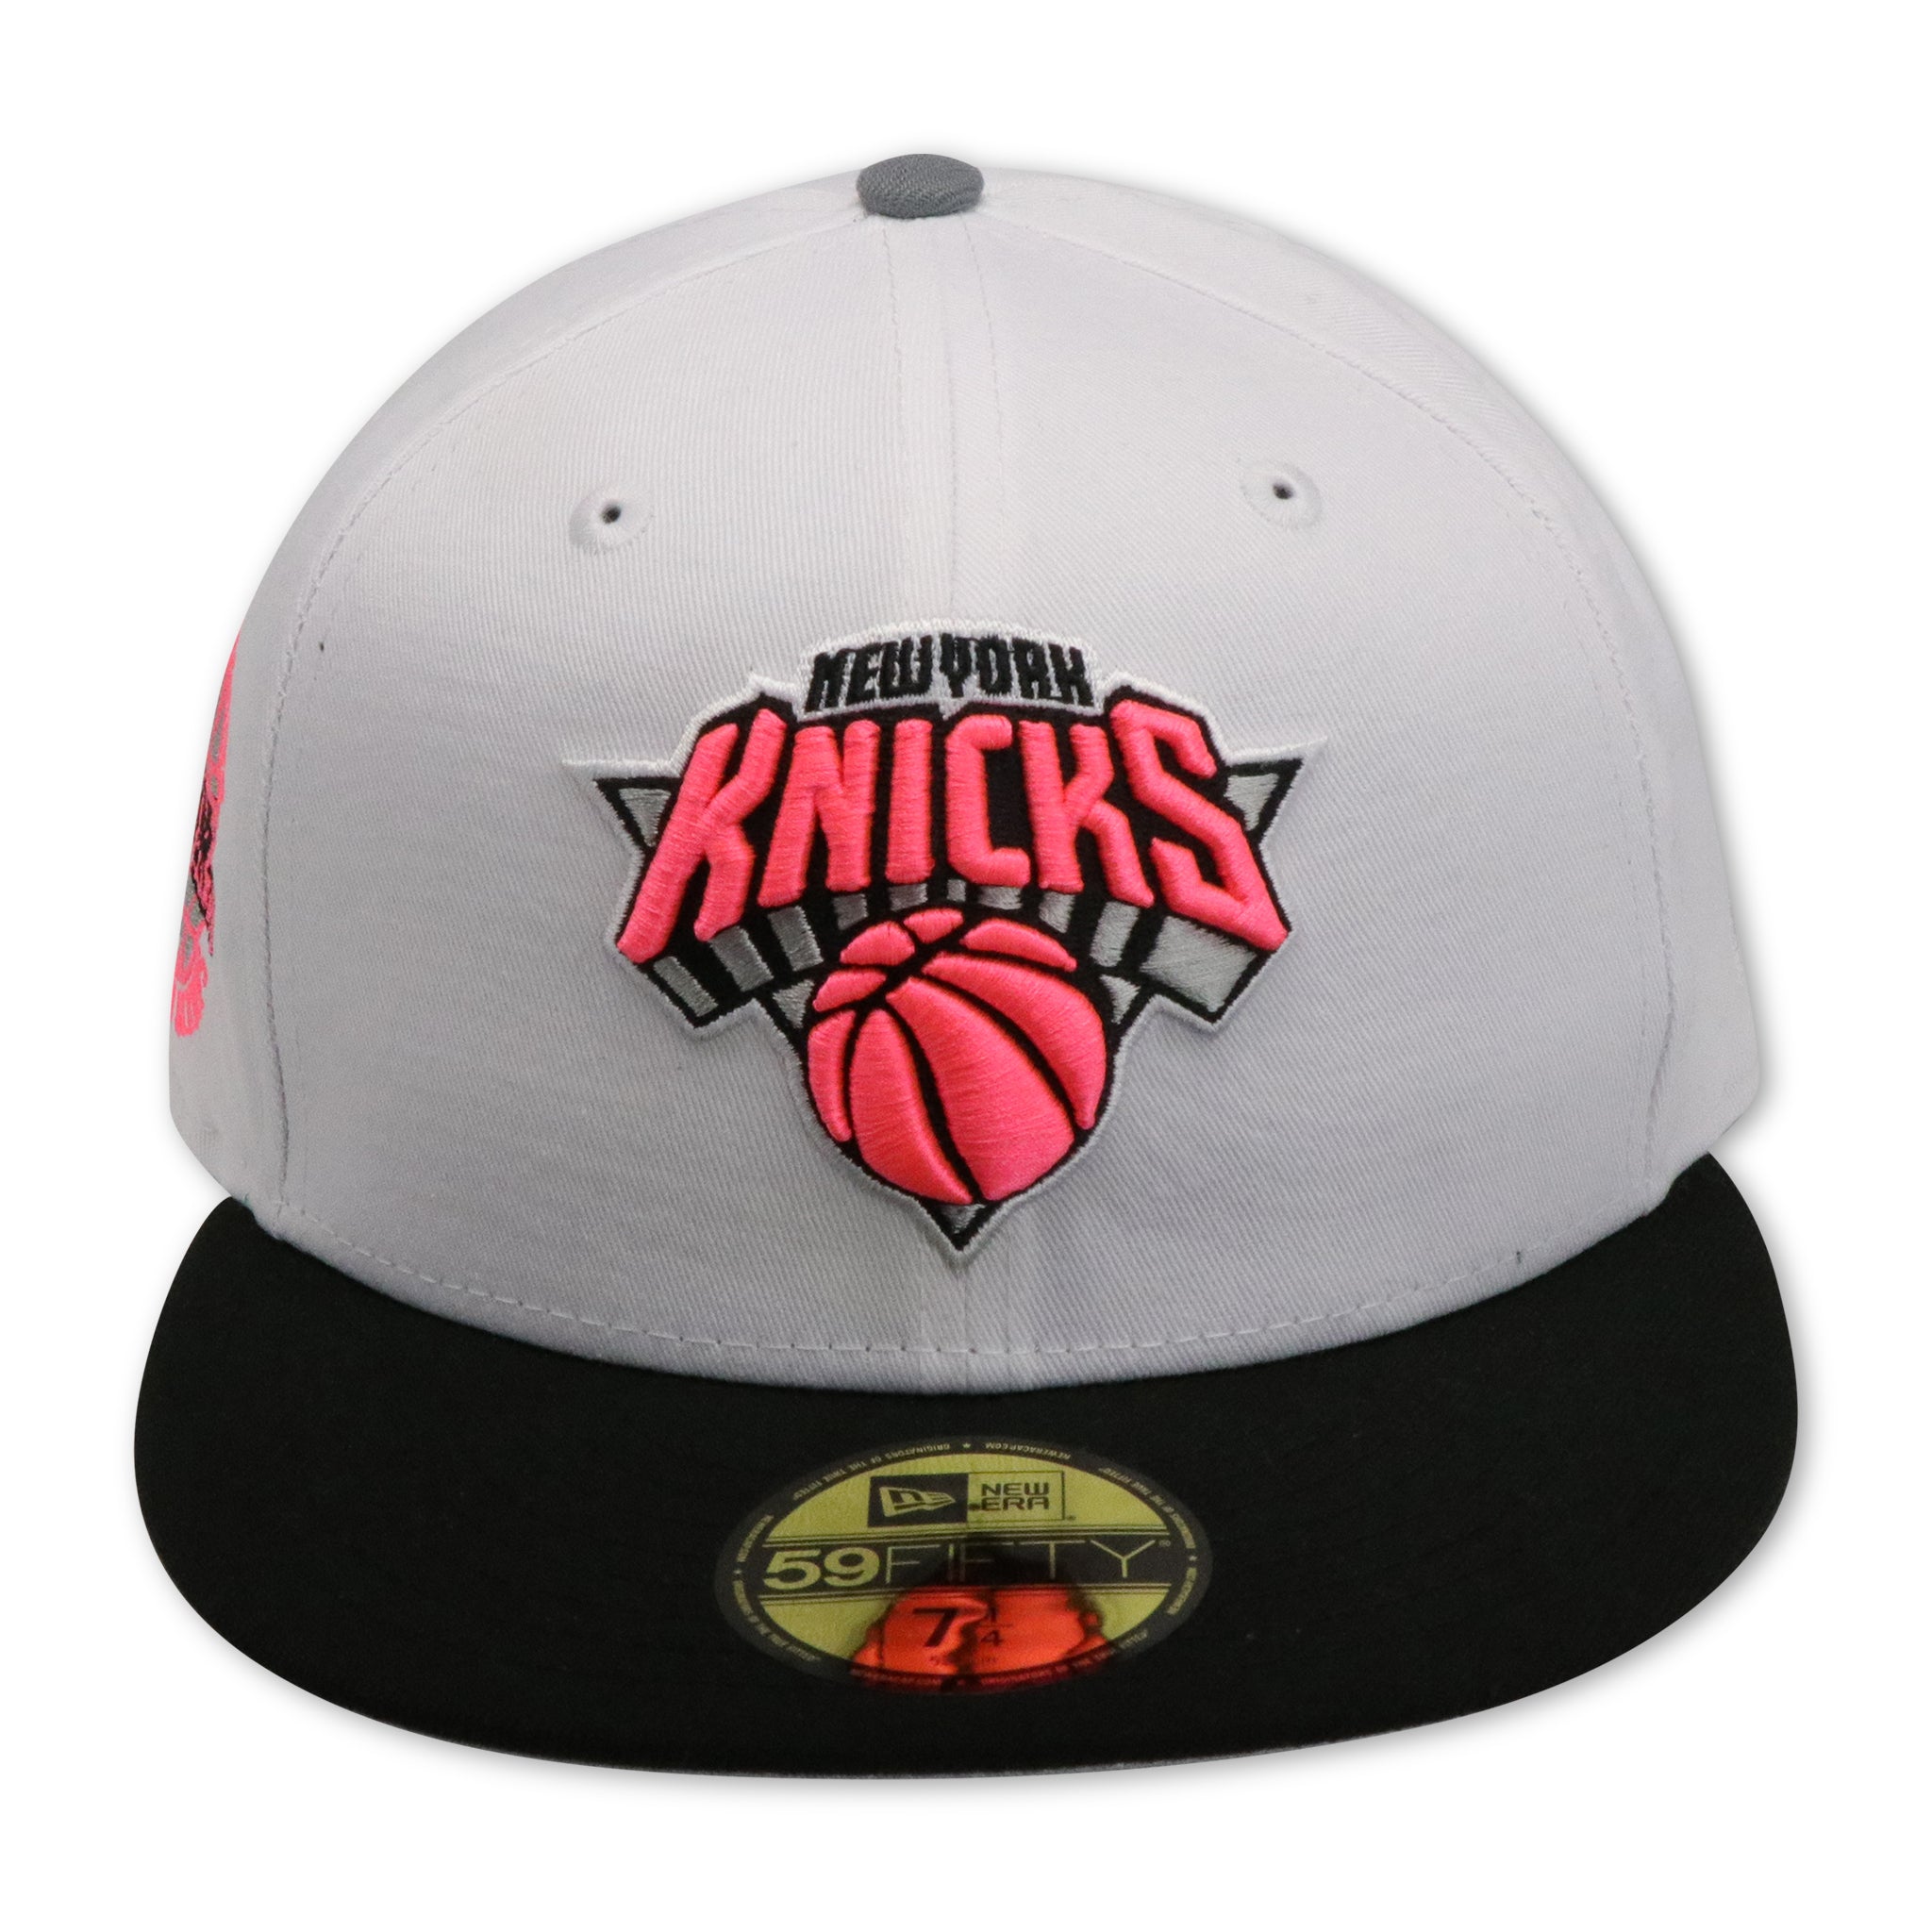 NEW YORK KNICKS (WHITE) "2X WORLD CHAMPS" NEW ERA 59FIFTY FITTED